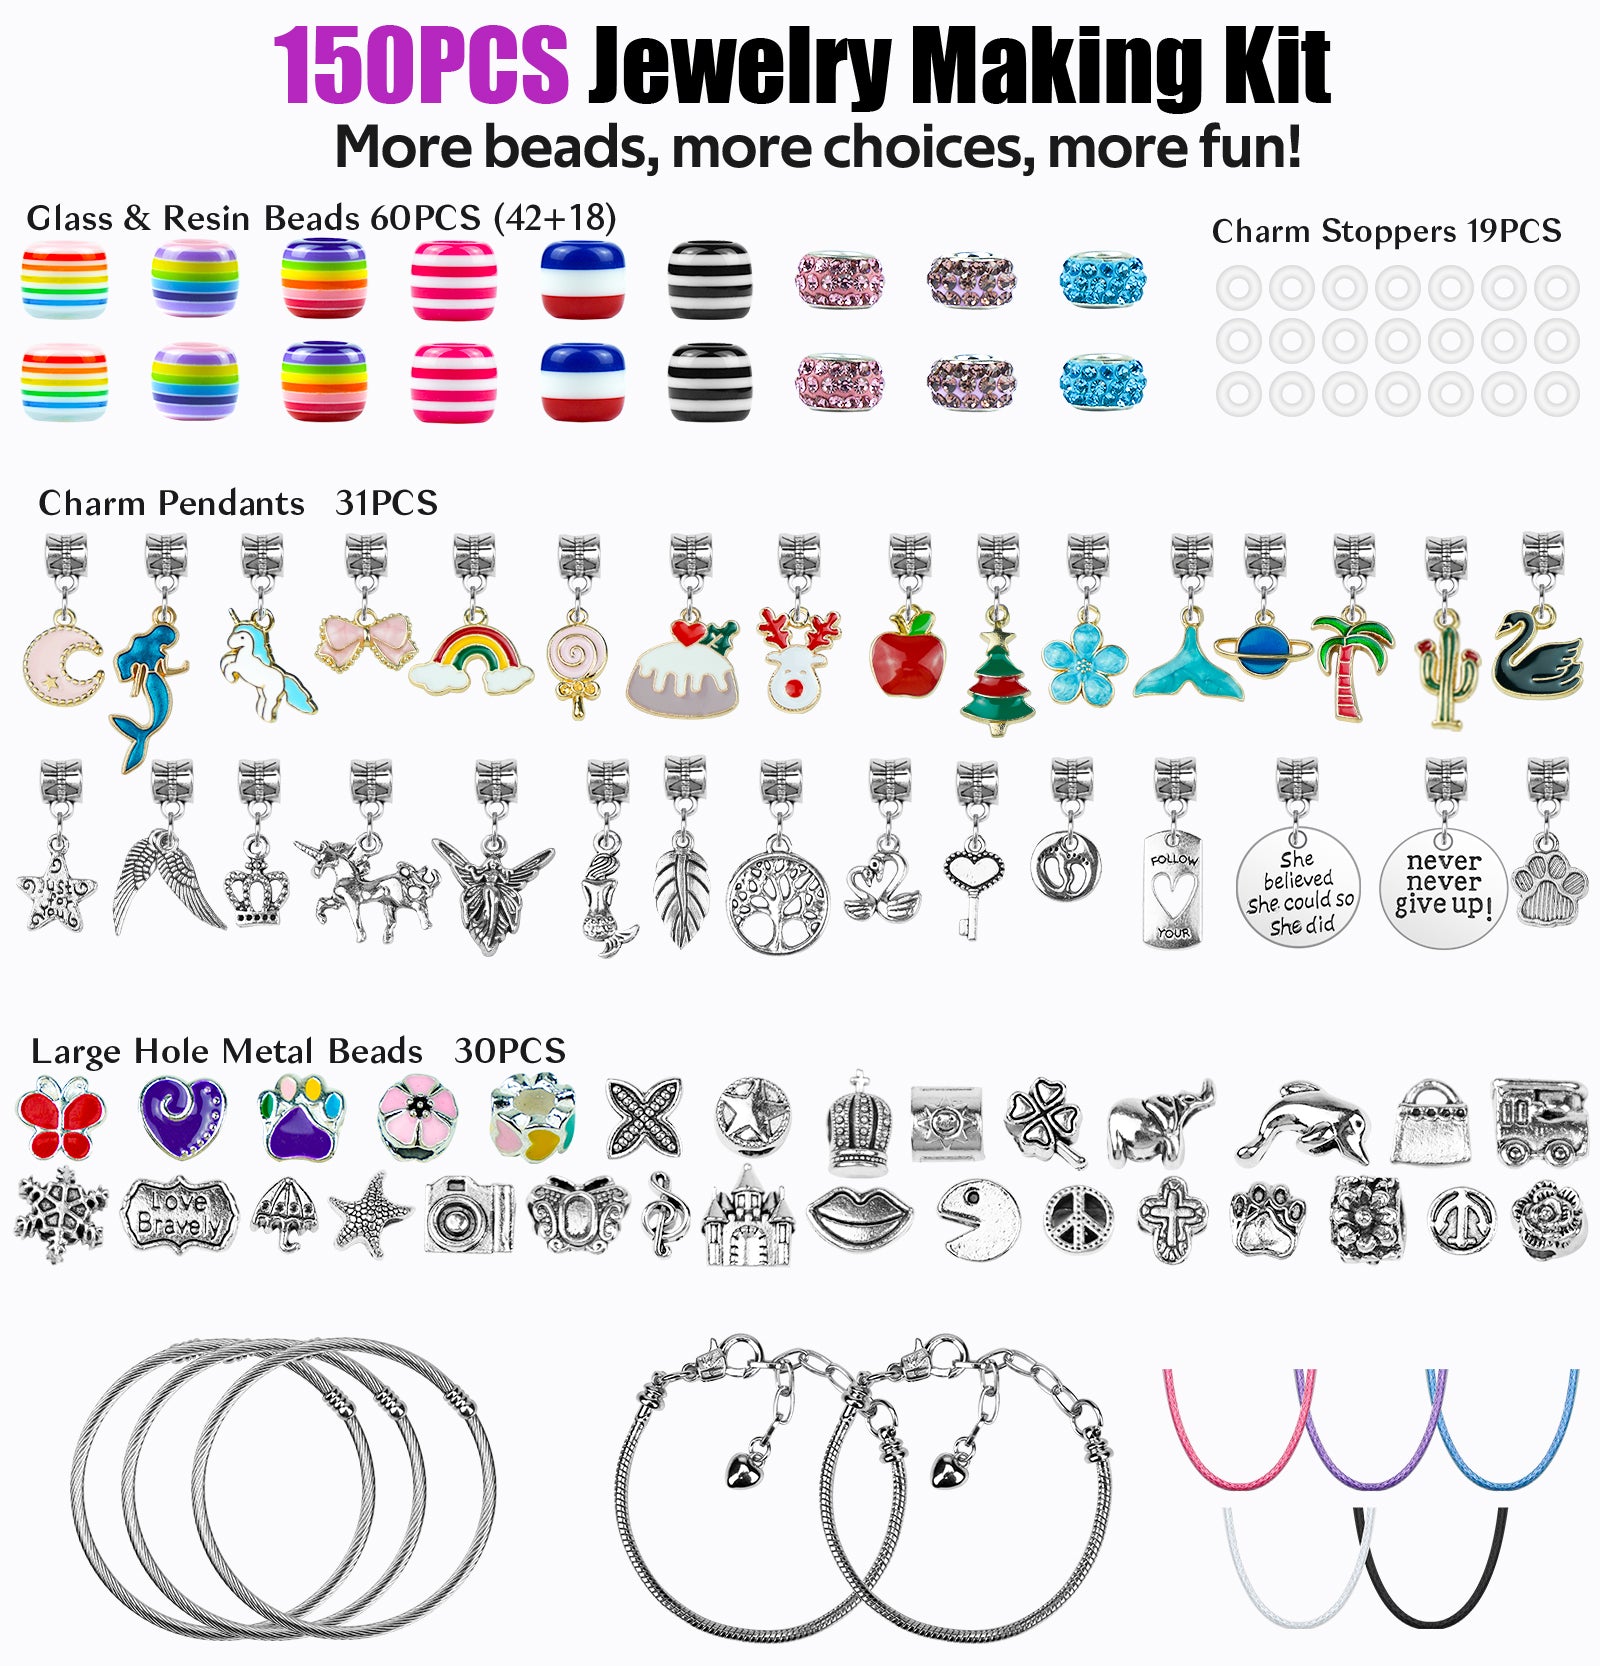 150 Pcs Charm Bracelet Making Kit - Gionlion Jewelry Making Supplies Beads - Unicorn/ Mermaid Crafts Gifts with Snake Chains - Arts Stuff Gift Set for Girls Teens Kids Age 5 6 7 8 9 10-12 Year Old